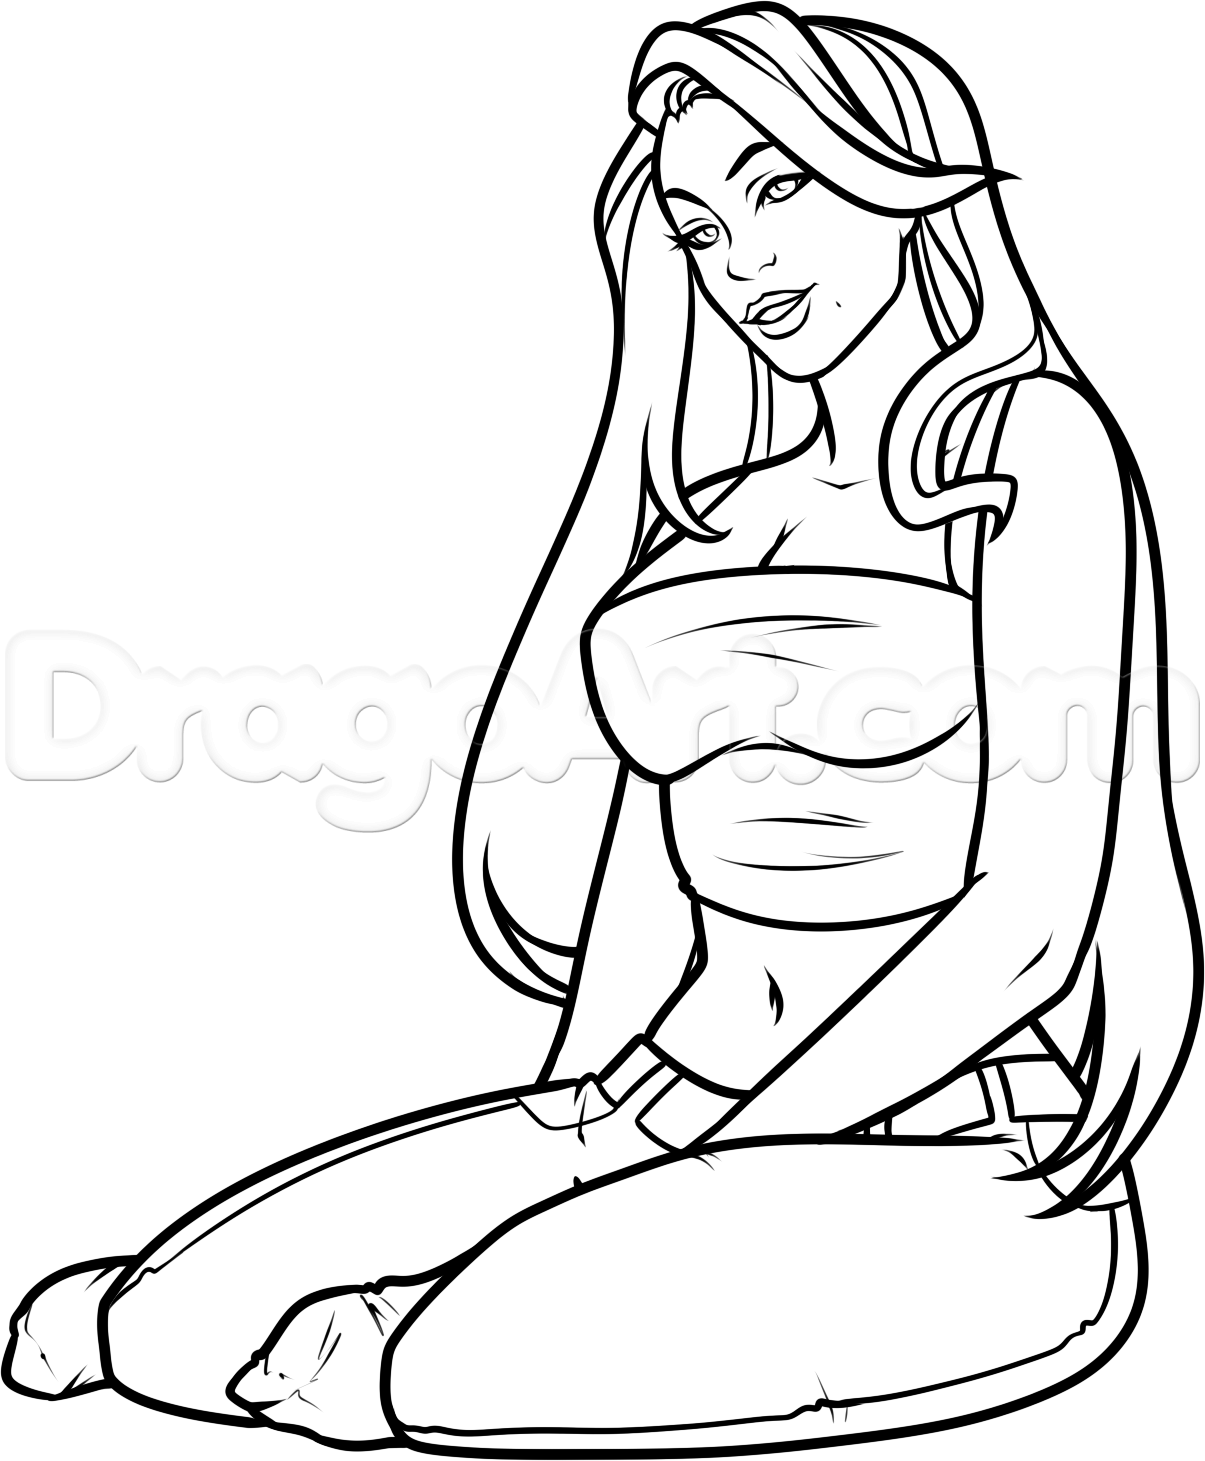 how-to-draw-a-woman-step-11_1_000000174575_5